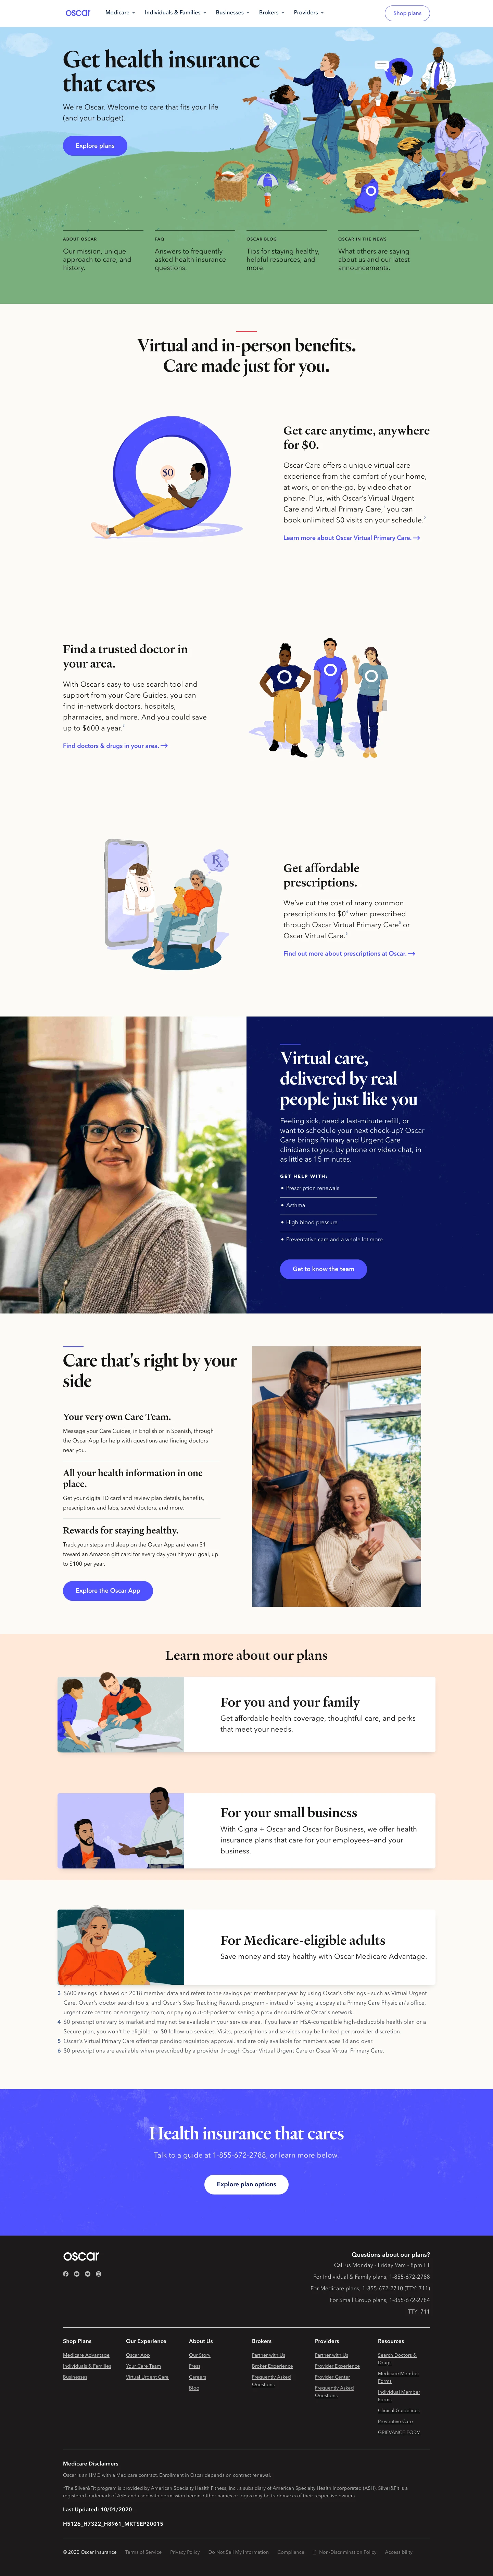 Oscar Landing Page Example: Oscar is the first health insurance company built to make health care easy. Our focus on simplifying health care for the consumer is driving record levels of member engagement—and customer satisfaction—in the industry.